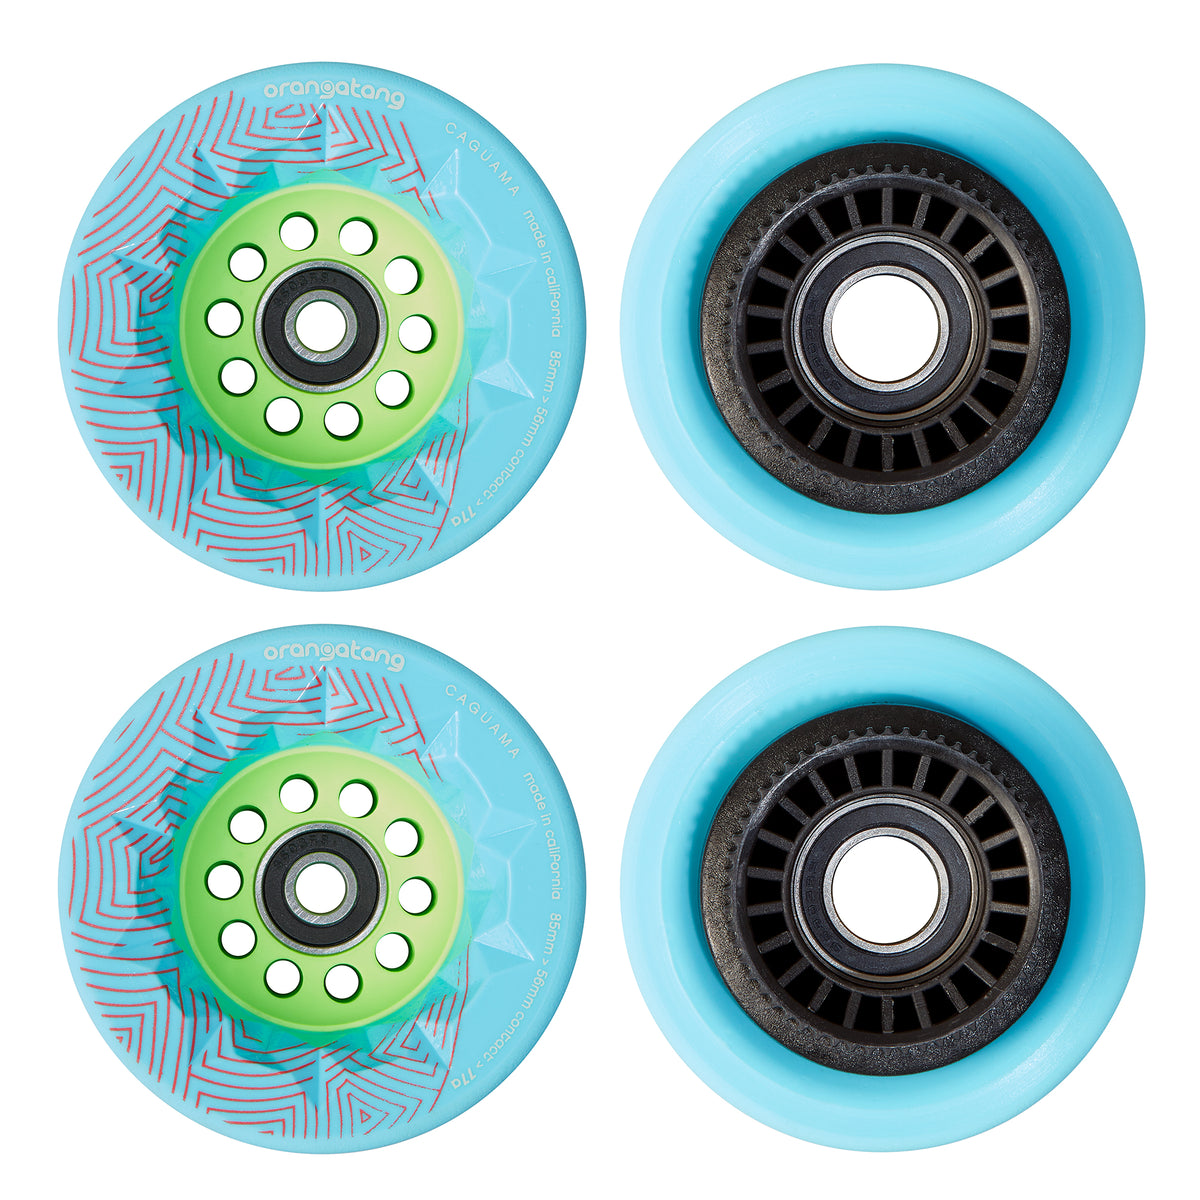 Boosted or Evolve Loaded Caguama 85mm 77a Wheels W / Pulleys - Blue